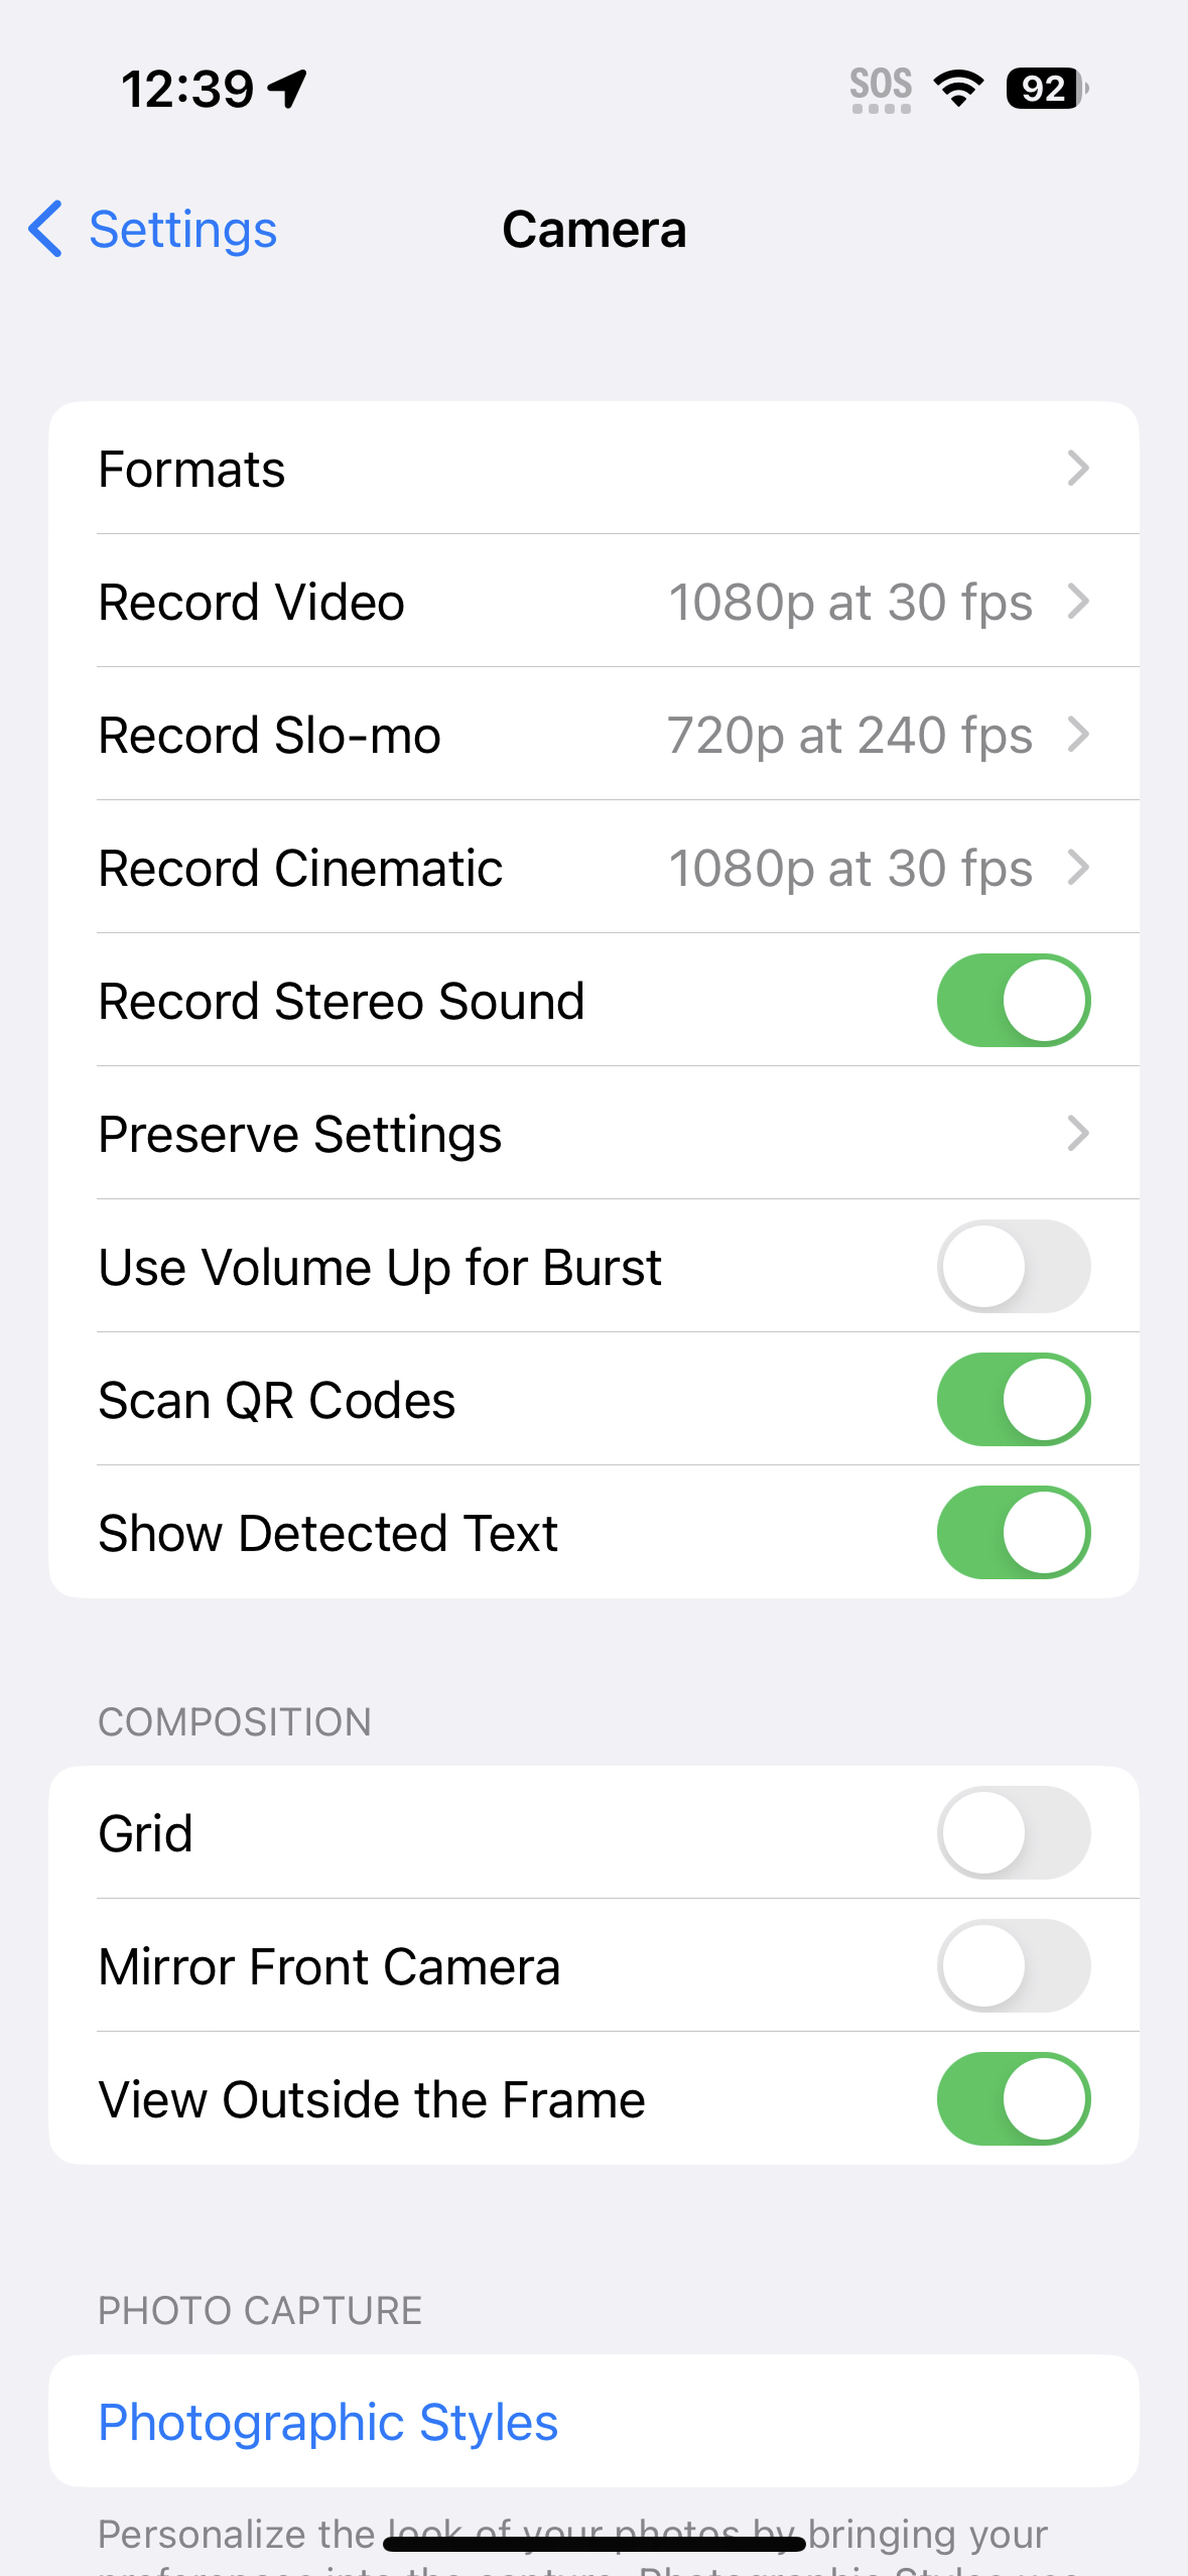 Screenshot of camera app system settings with format options on top.